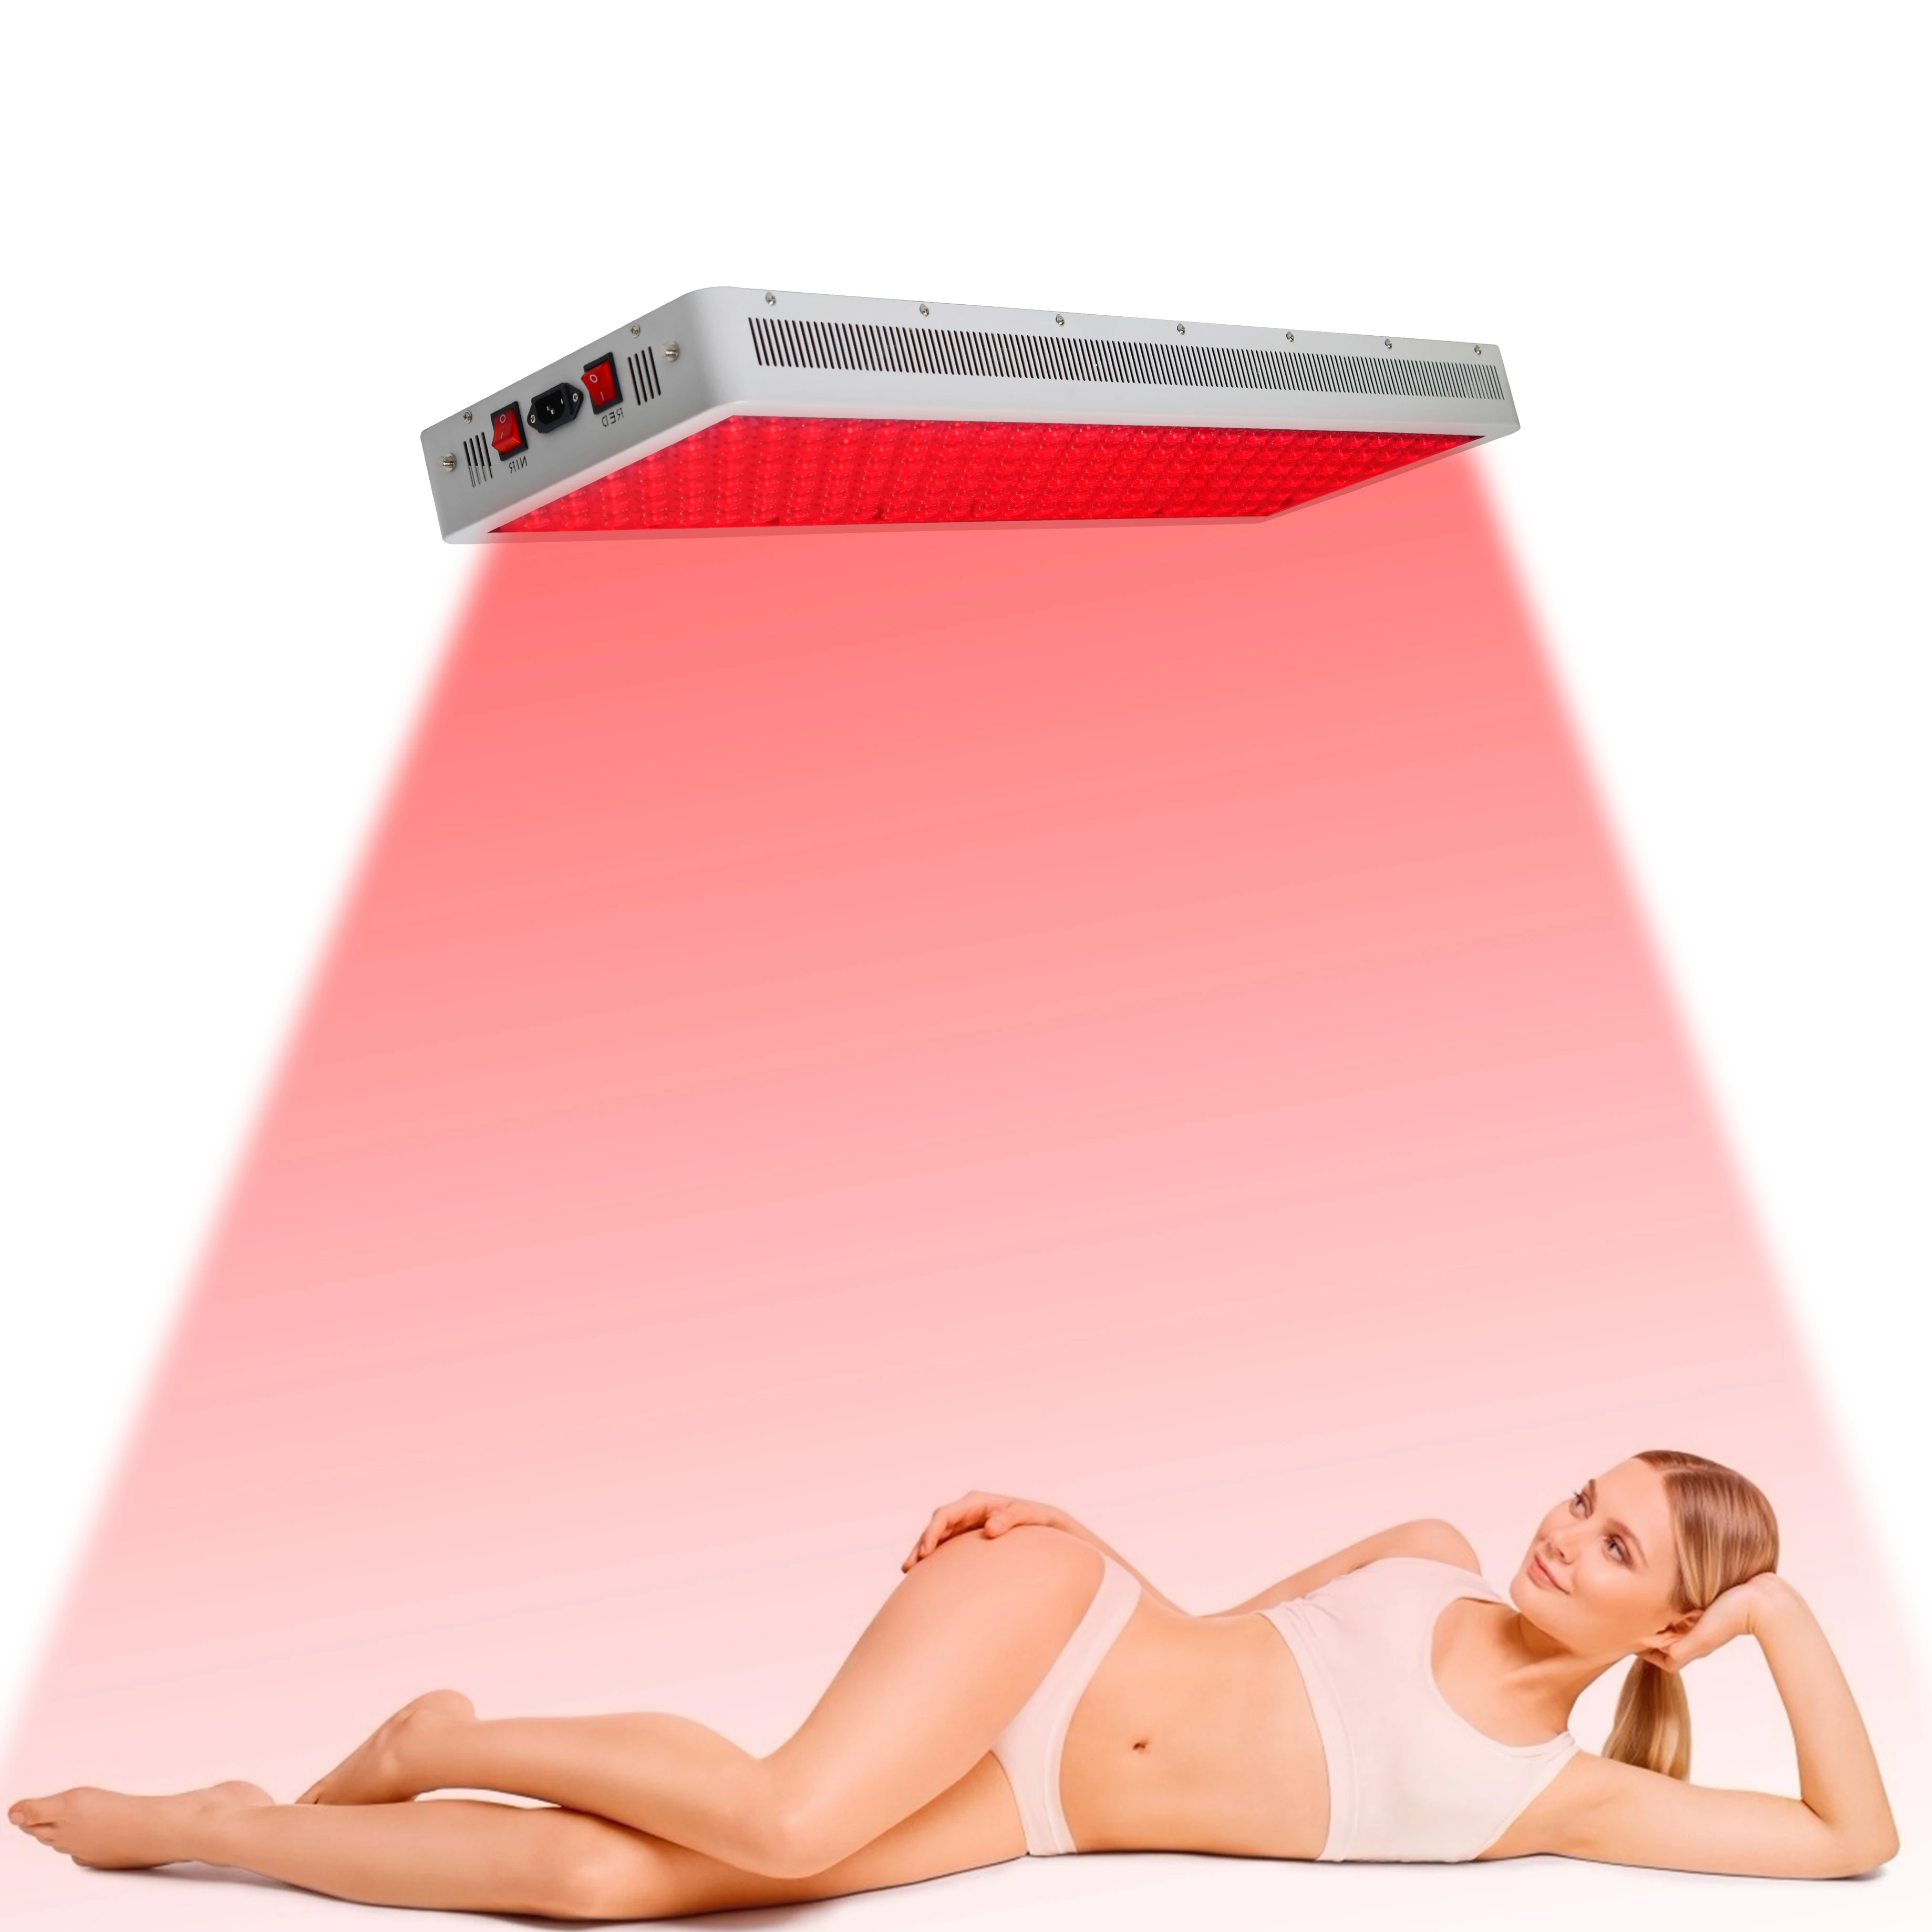 SGROW VIG1500 Waist and Back Pain Full Body Treatment Led Light Therapy 1500W 660nm Red Light Therapy Panel